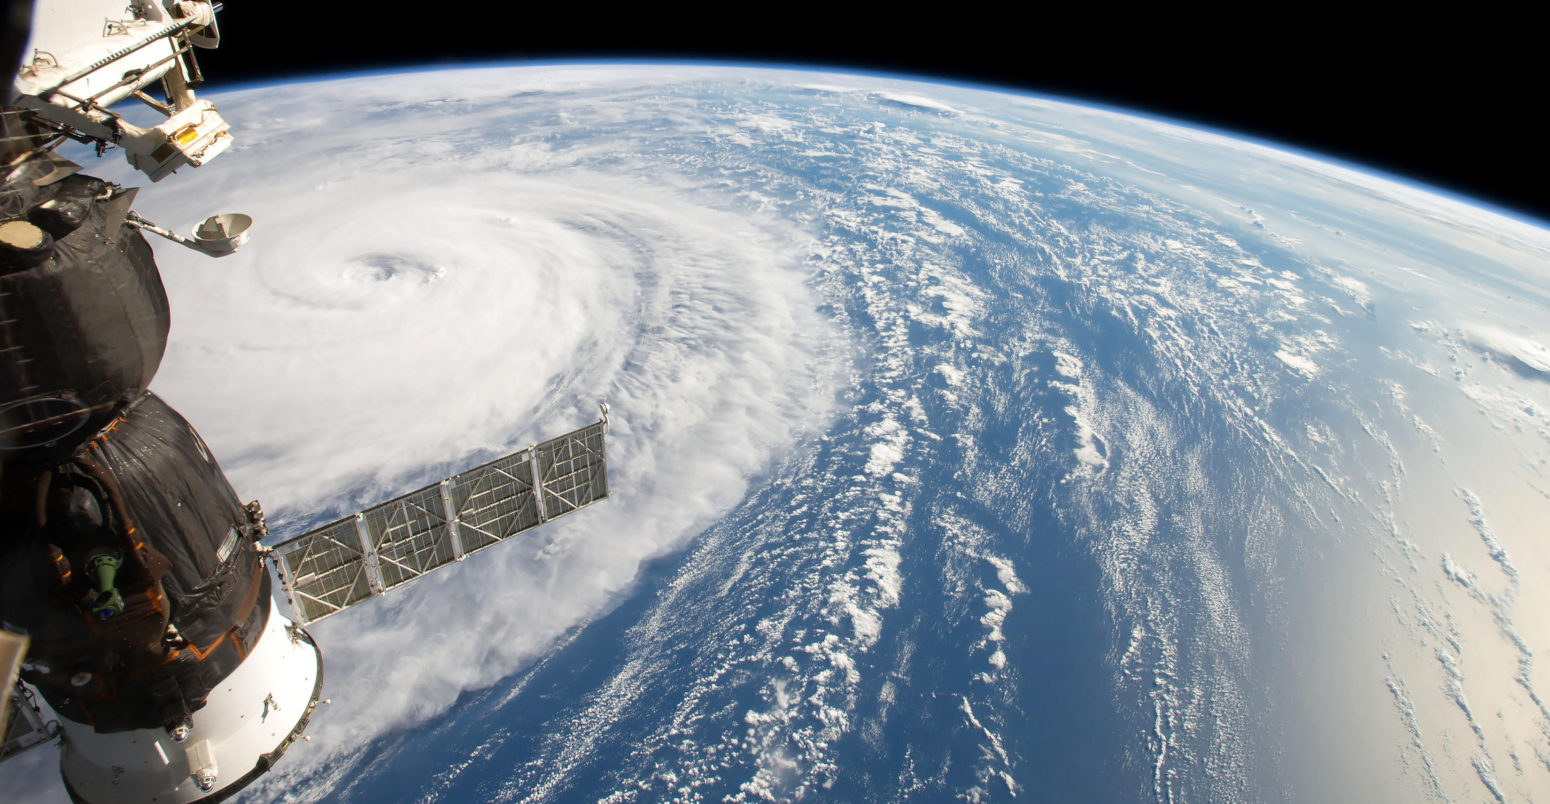 K2FMM3 Hurricane Harvey, seen fom the International Space Station. Elements of this image are furnished by NASA.